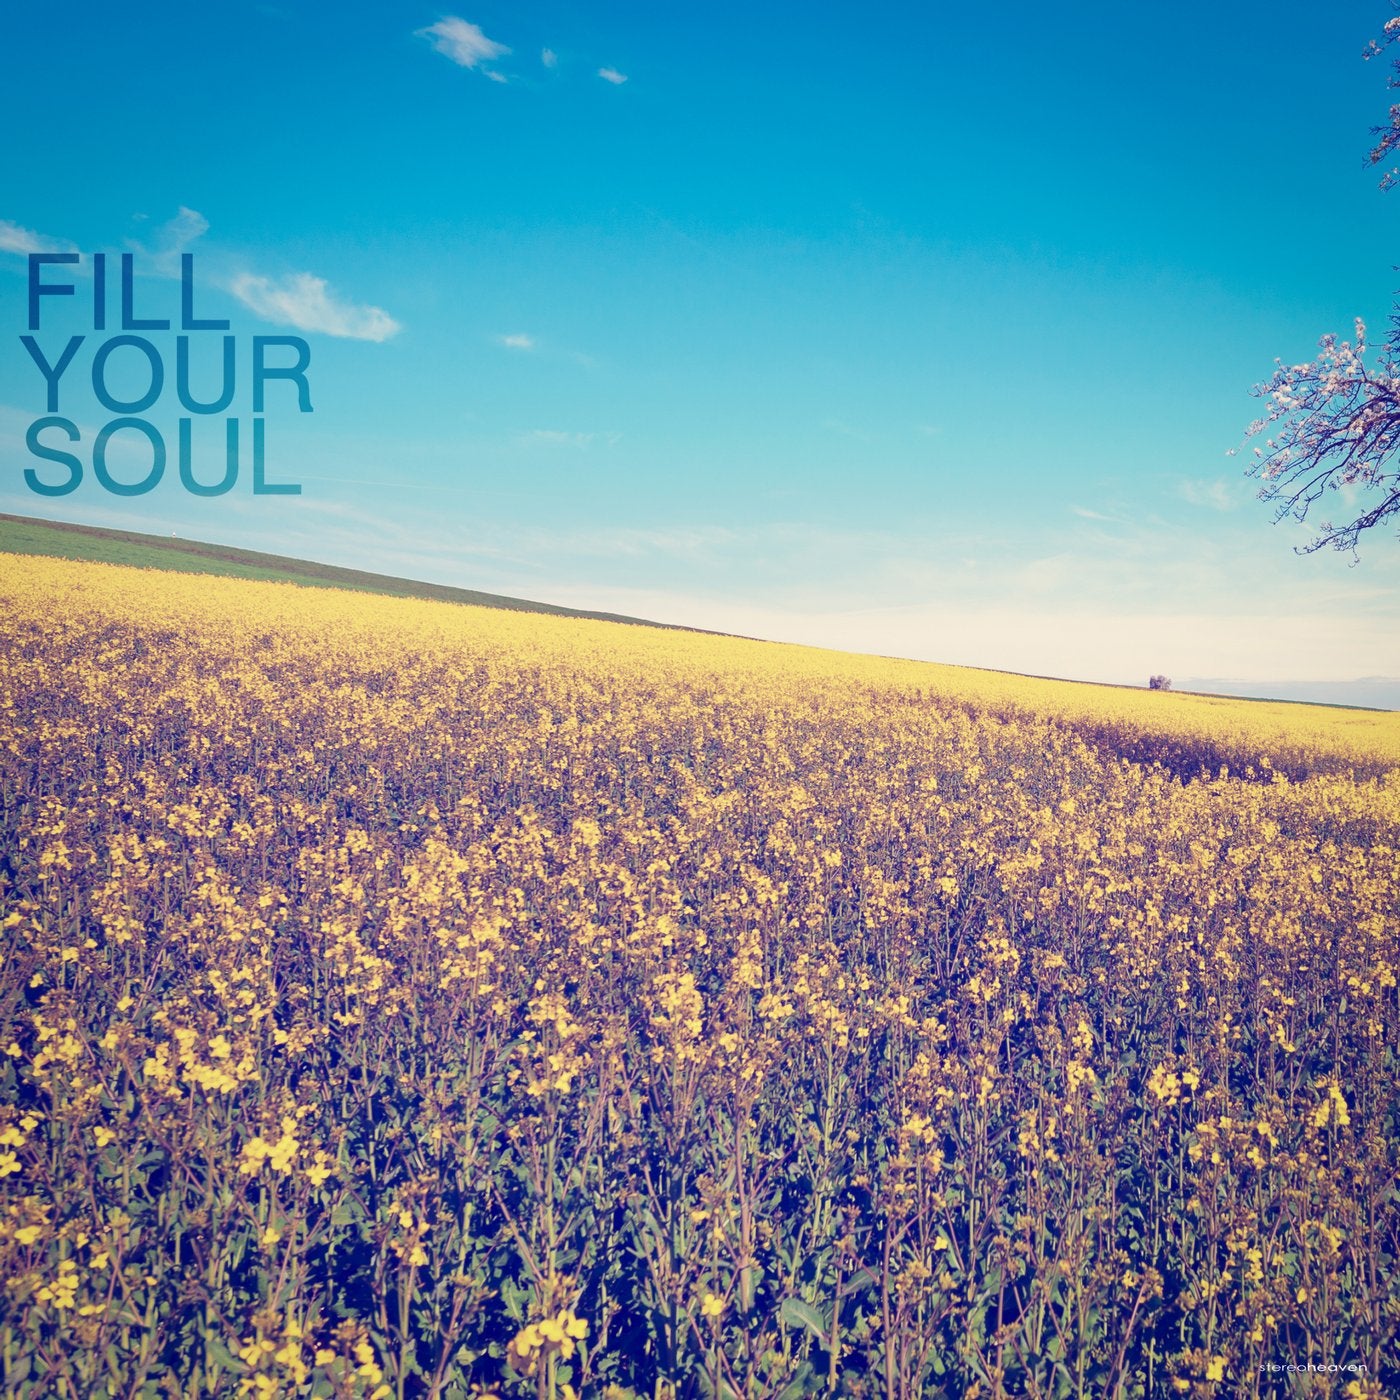 Fill Your Soul